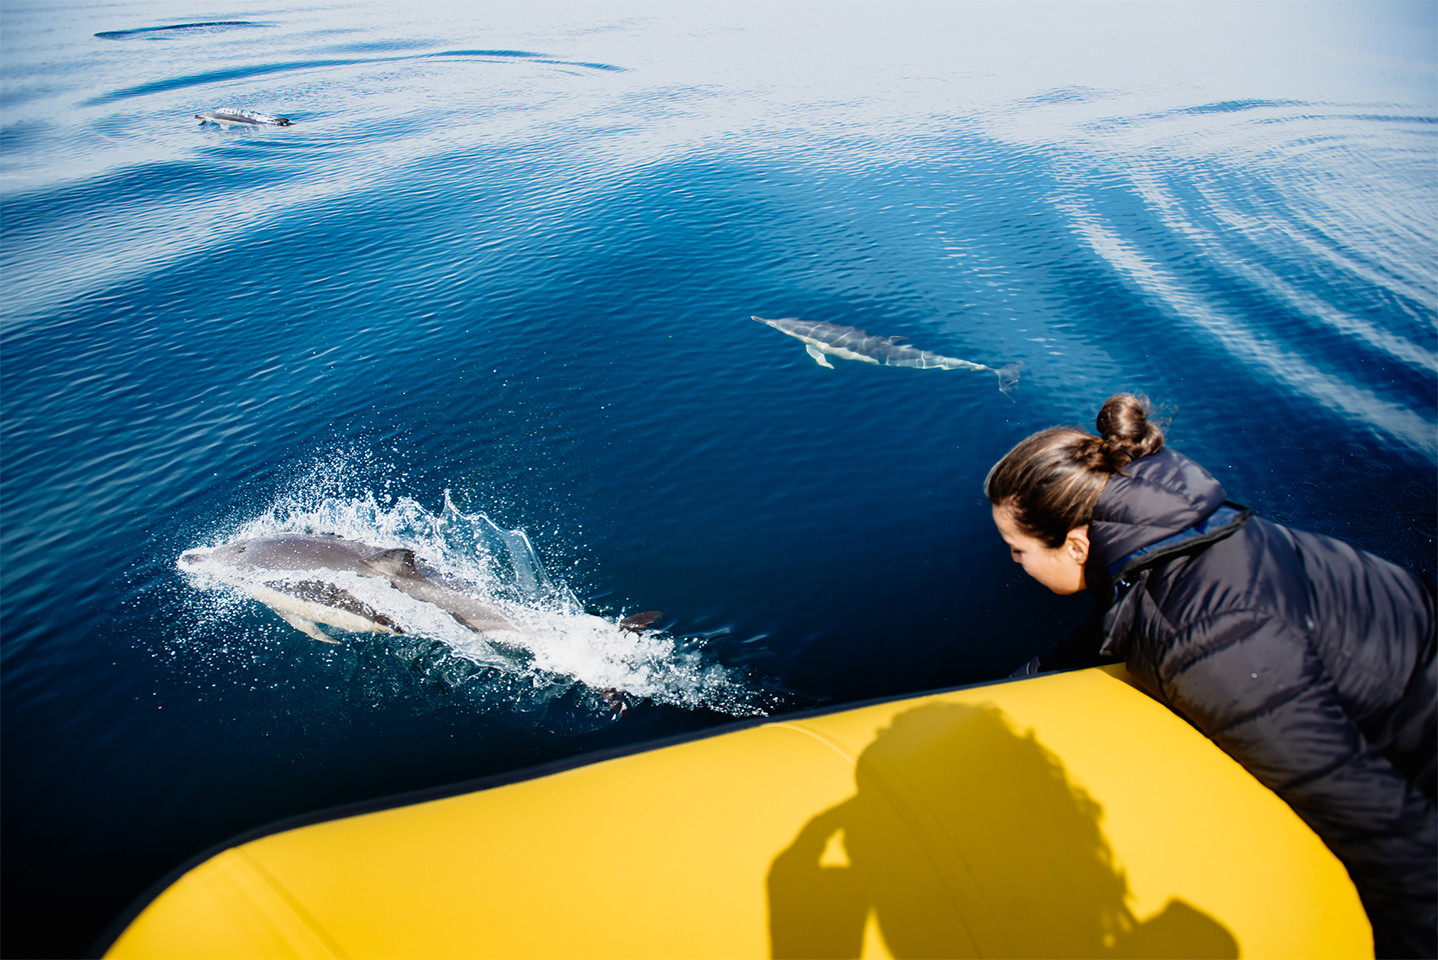 Get as close to dolphins as never before